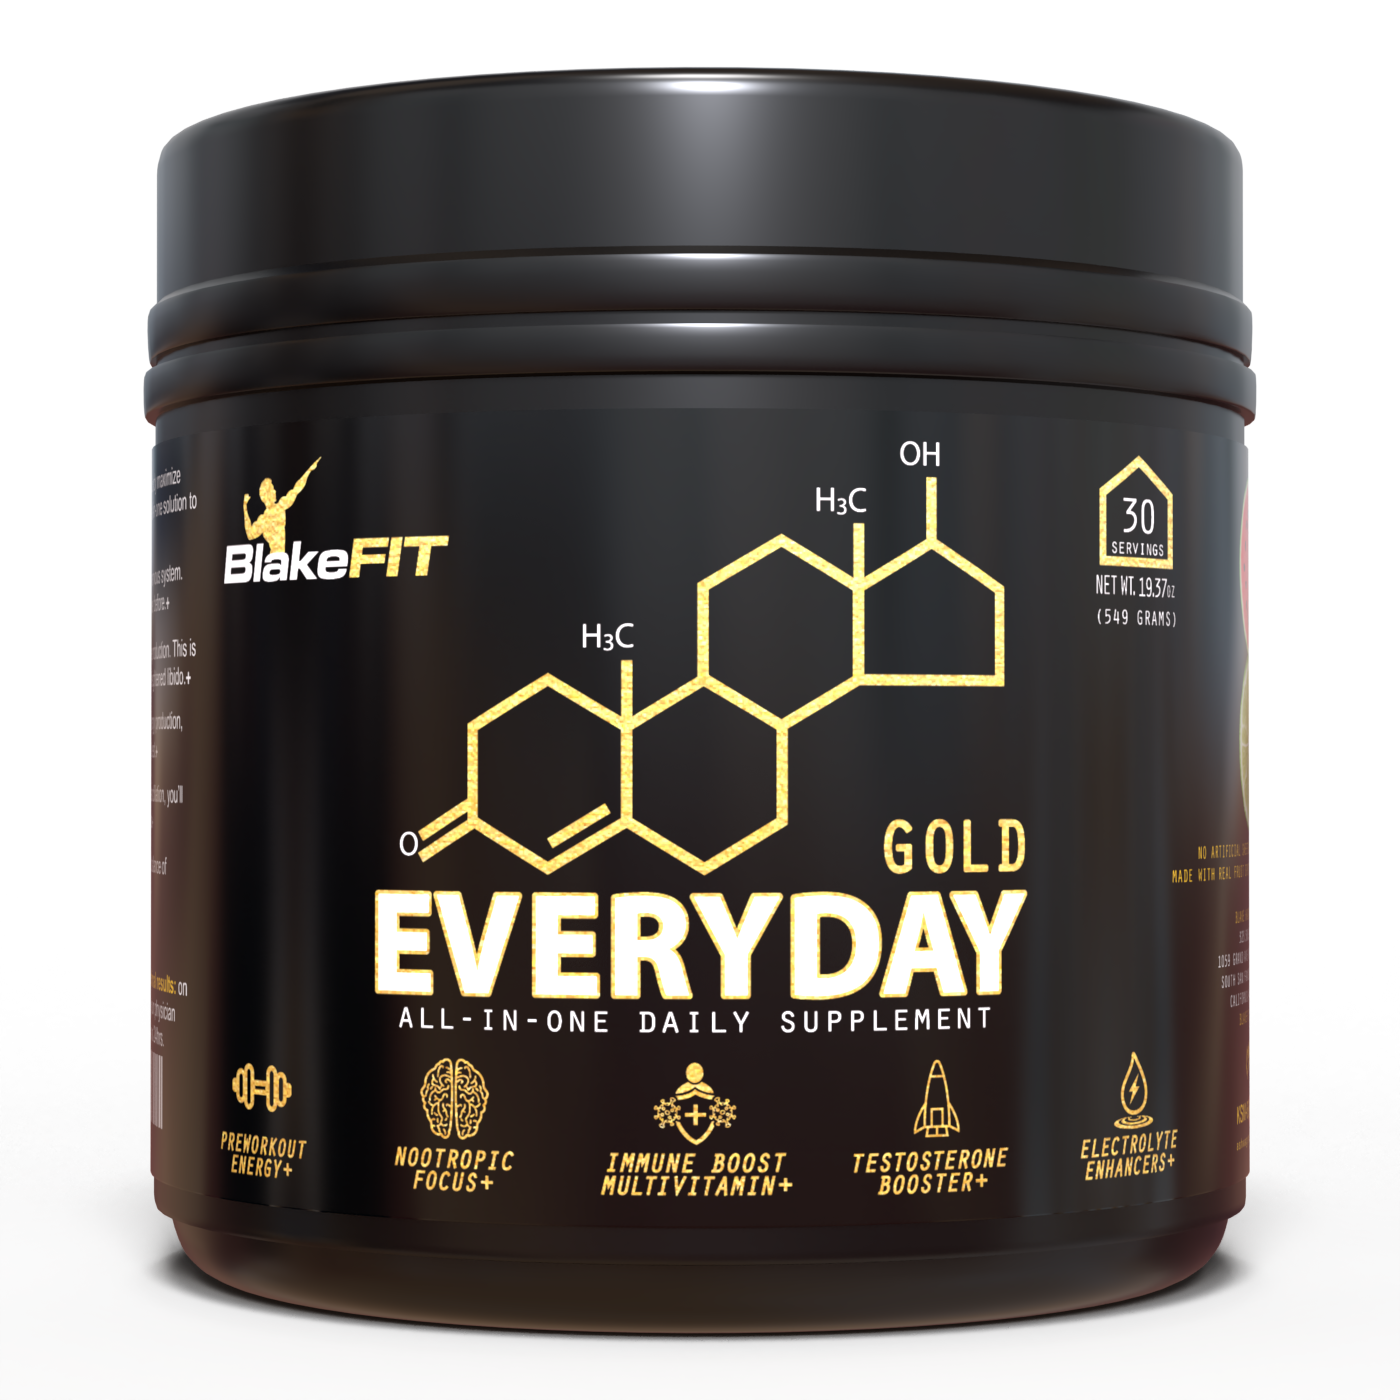 6-Pack Everyday Gold All-in-one Supplement Powder | Watermelon Lime | Immune Boost Multivitamin | Preworkout | Electrolytes | Nootropics | Keto-Friendly | Vegan Certified